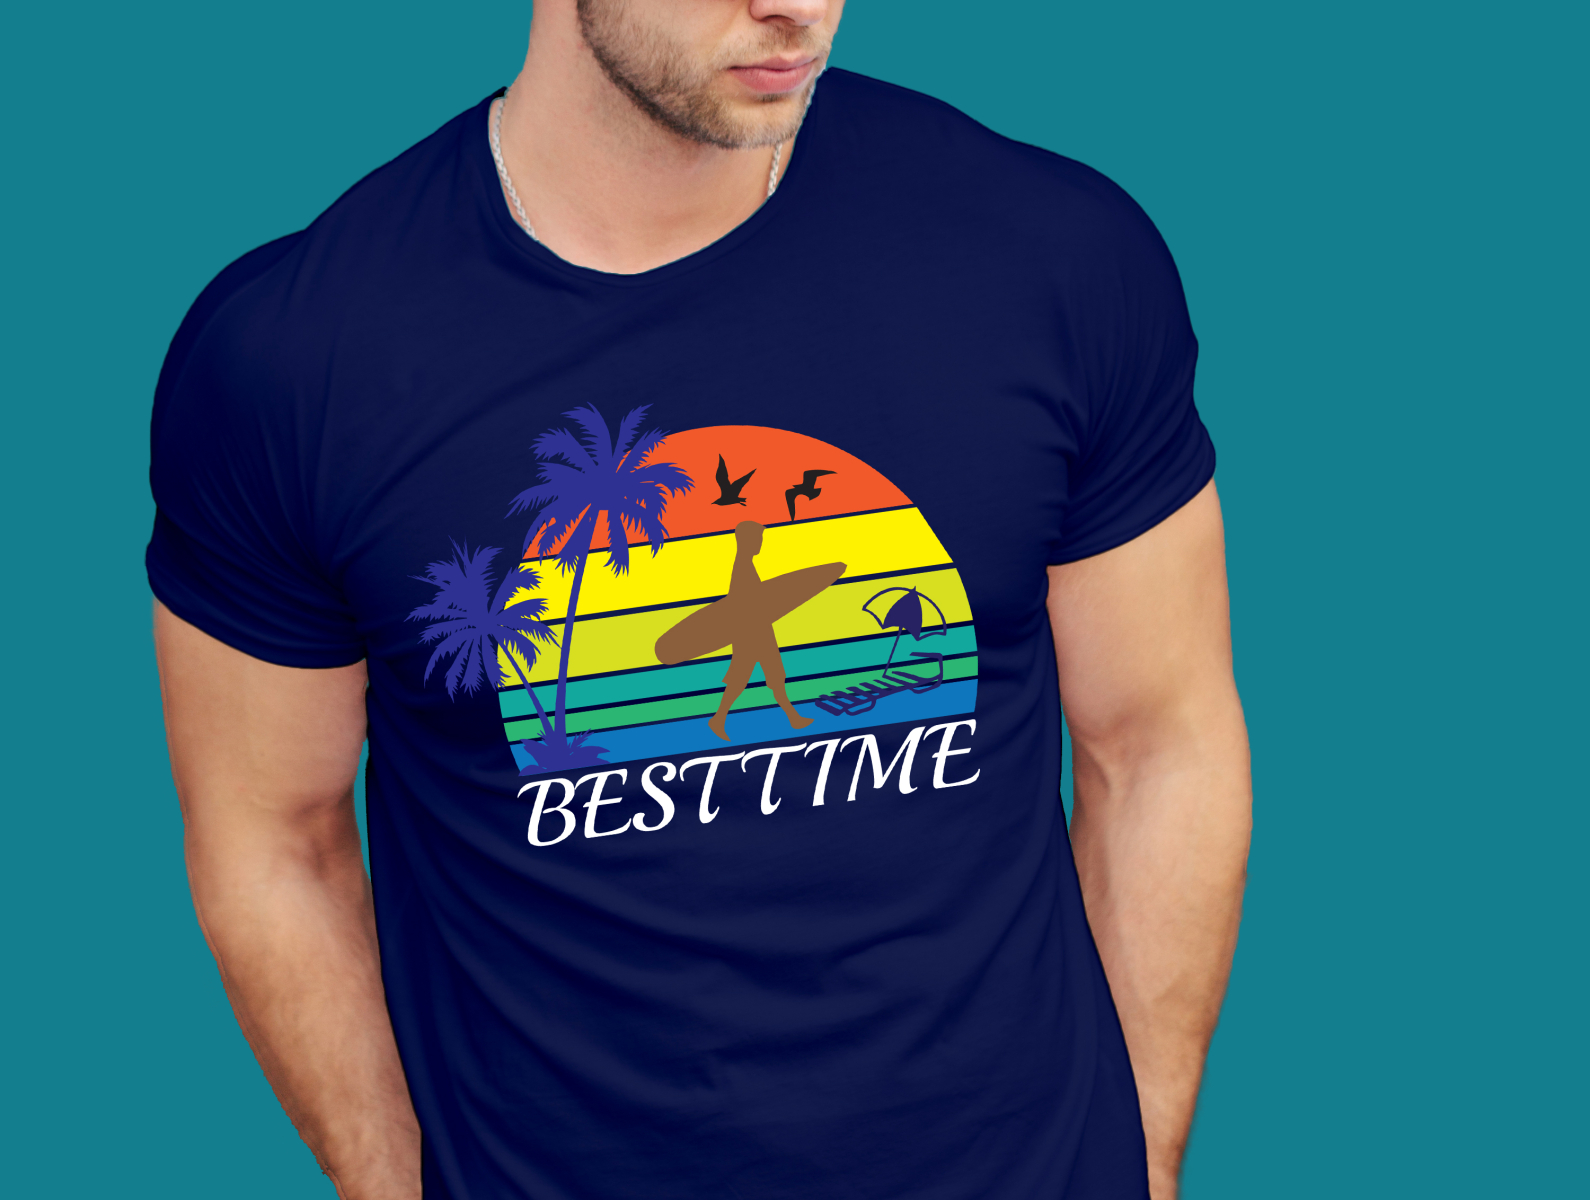 Beach T Shirt Design By Ruvel Ahmed On Dribbble